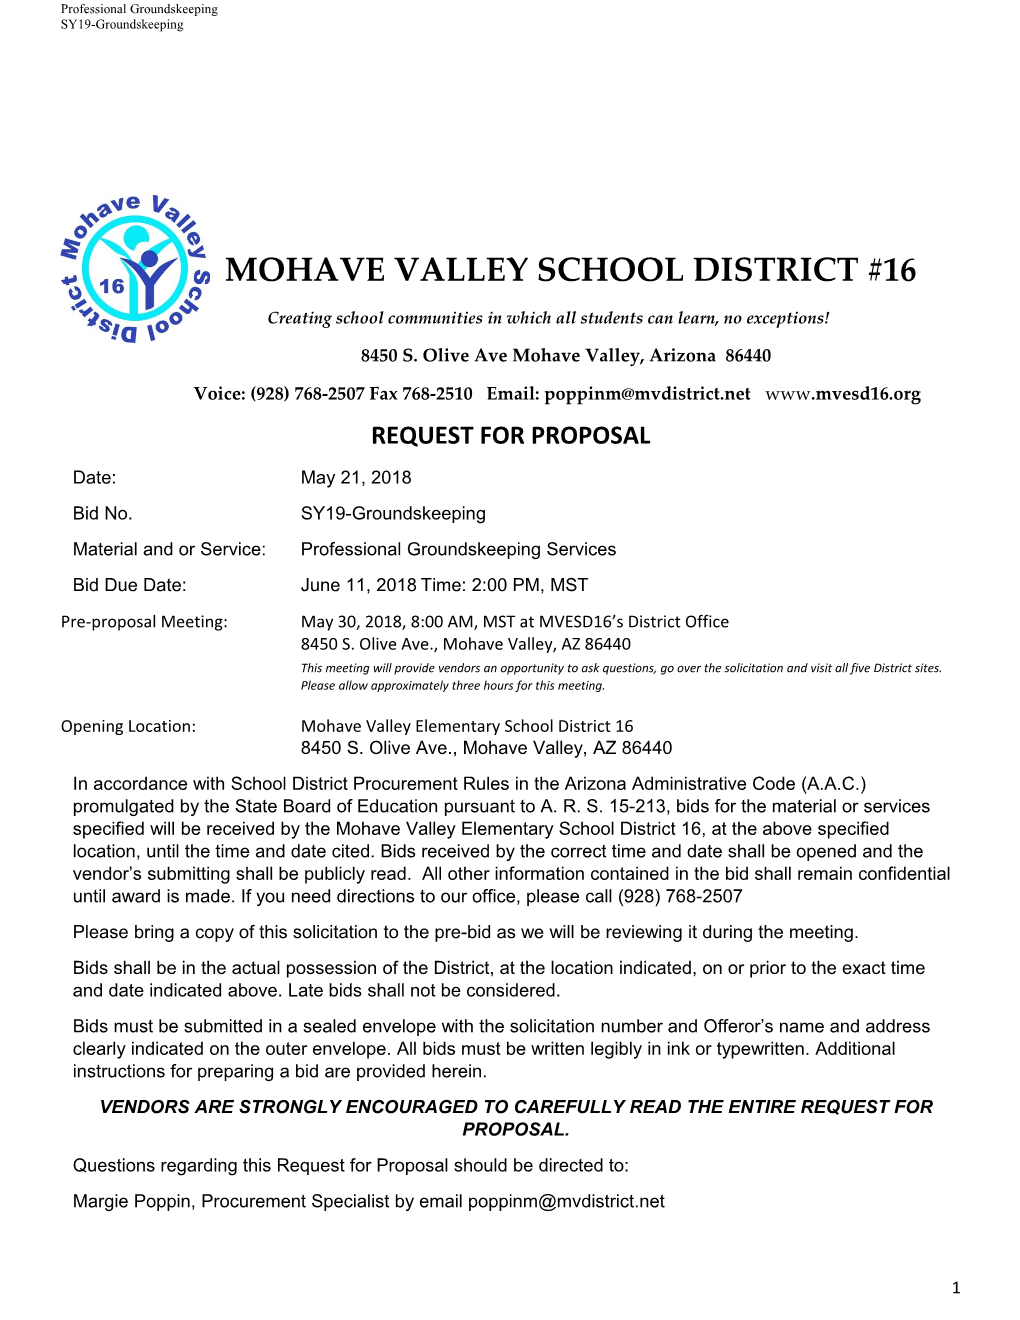 Mohave Valley School District #16